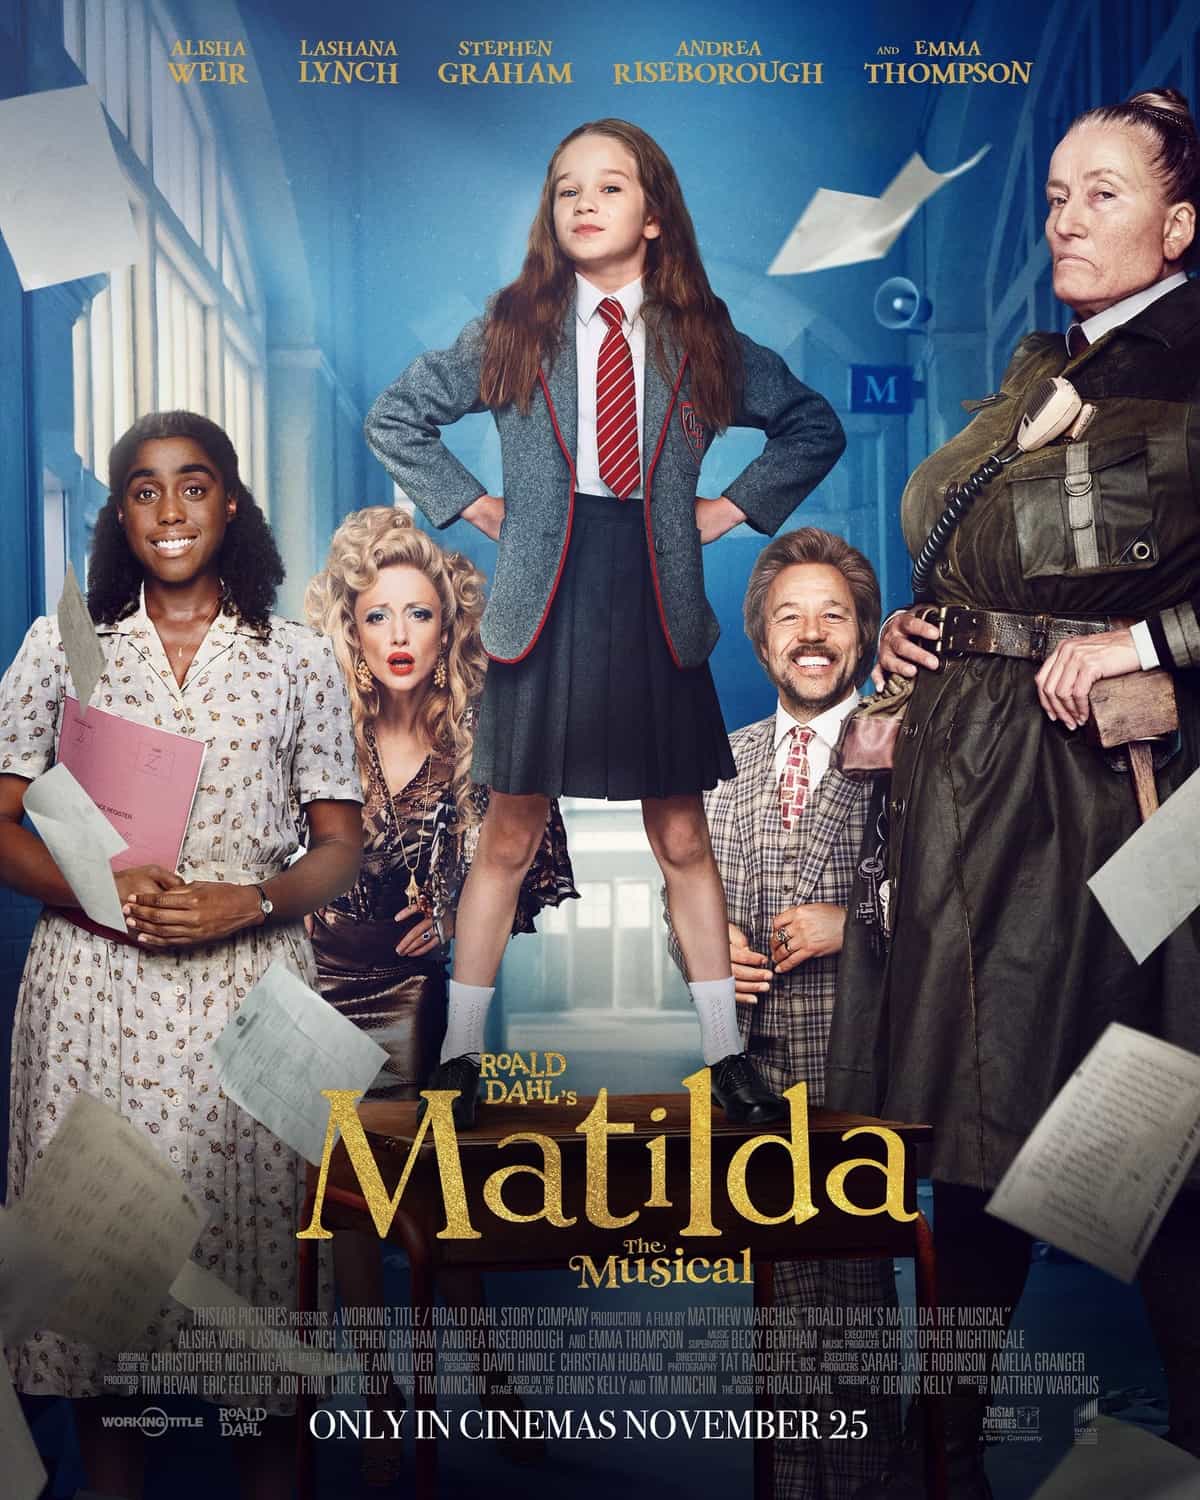 UK Box Office Weekend Report 9th - 11th December 2022:  Matilda the Musical tops the UK box office for the third weekend in a row